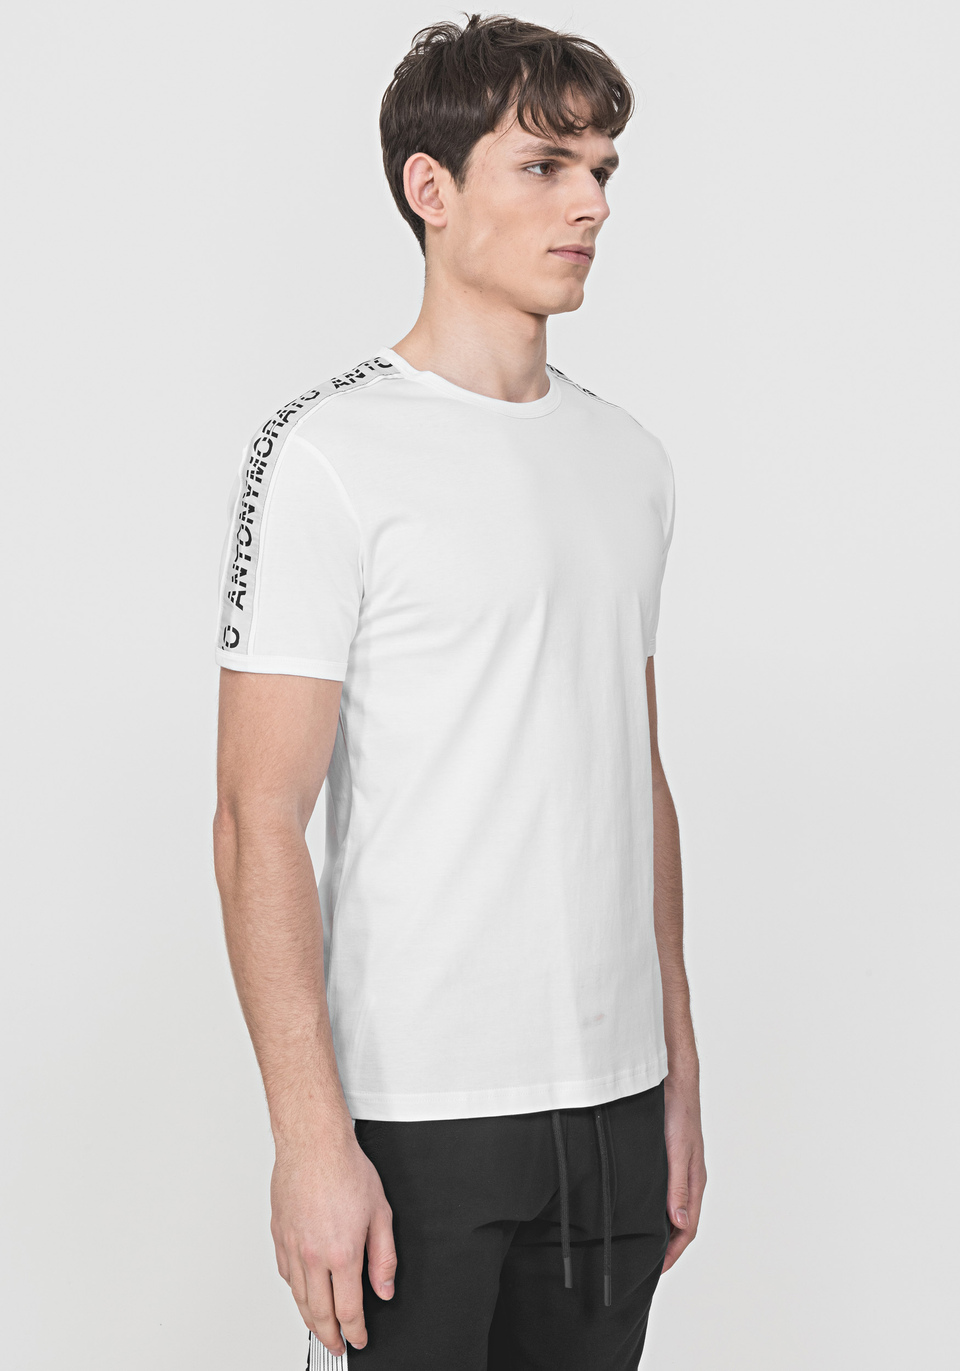 REGULAR-FIT T-SHIRT MADE FROM SOFT COTTON IN PLAIN HUES - Antony Morato Online Shop